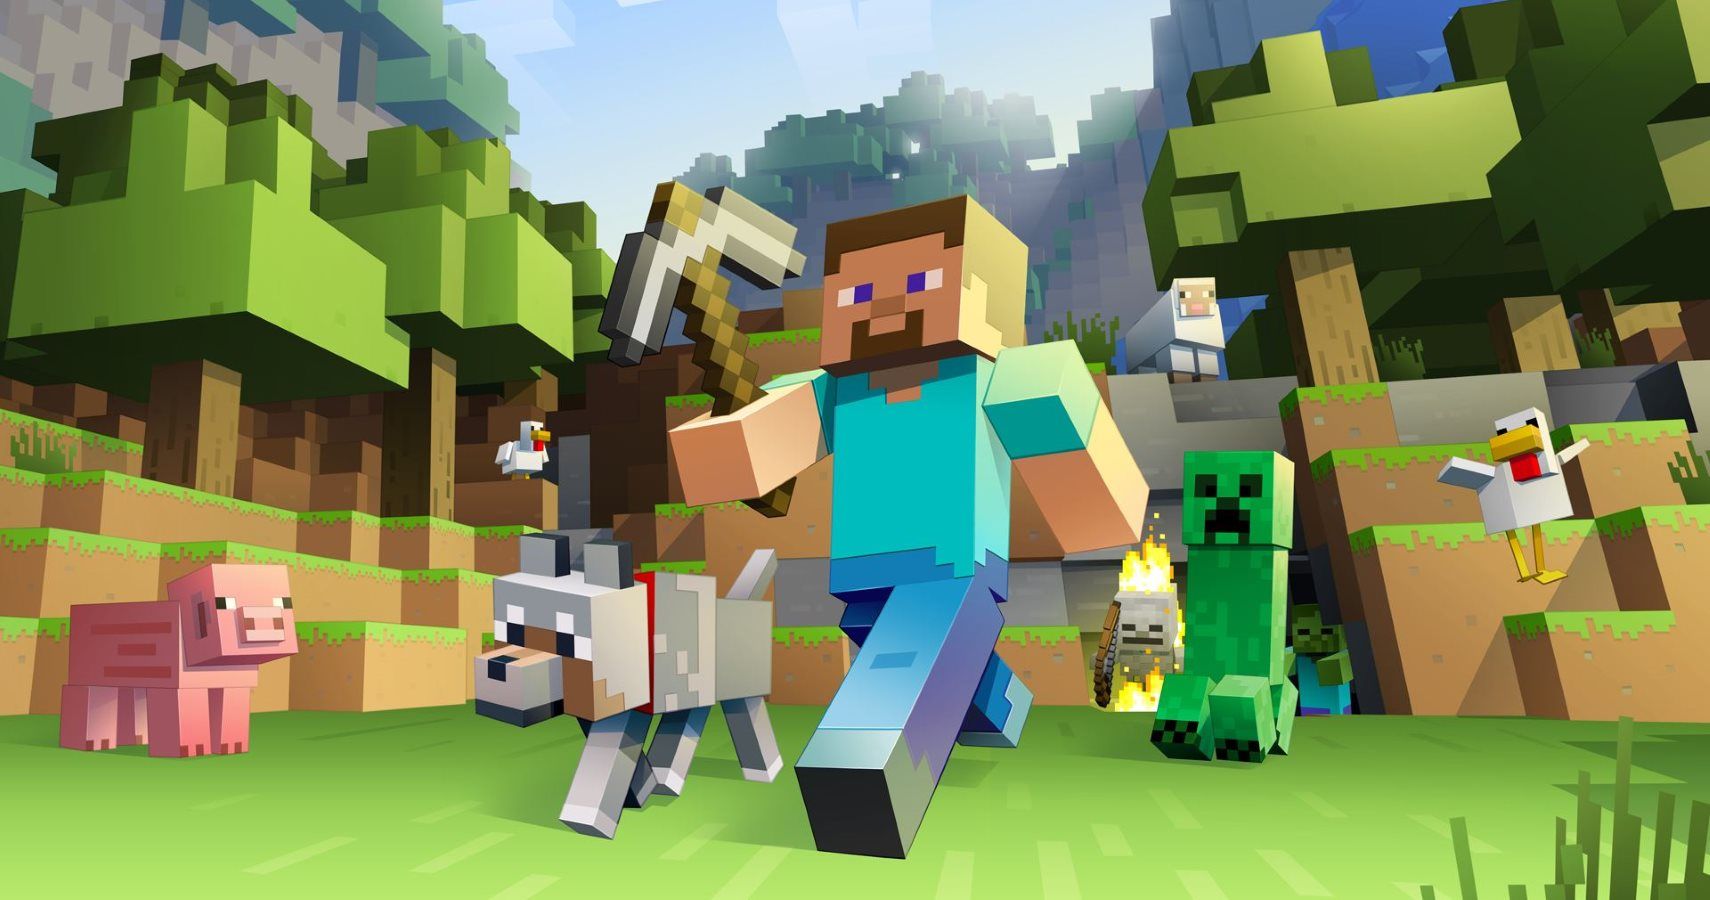 Minecraft Movie In Limbo After Losing Director - And Release Date